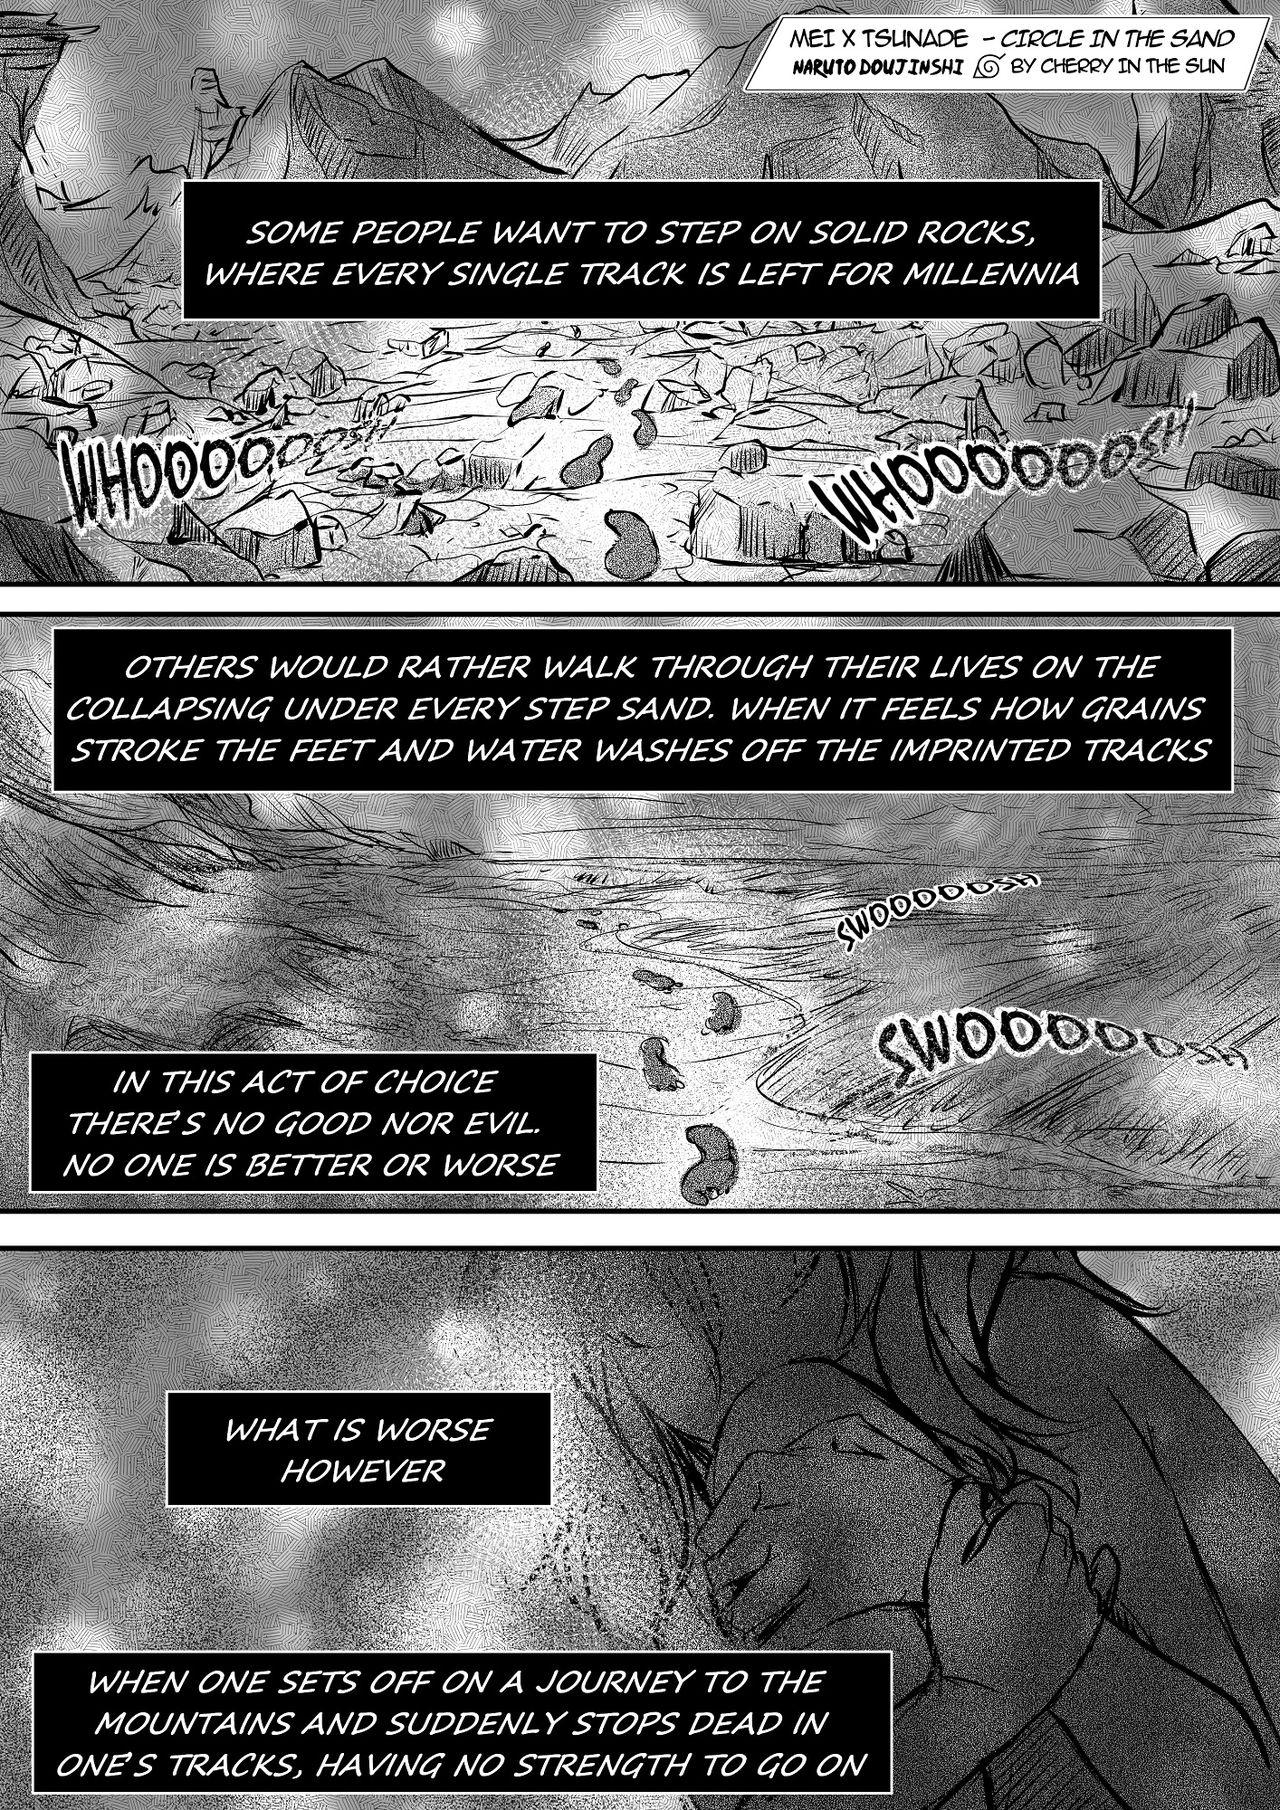 Porn Amateur Circle in the Sand - Naruto Dom - Page 2